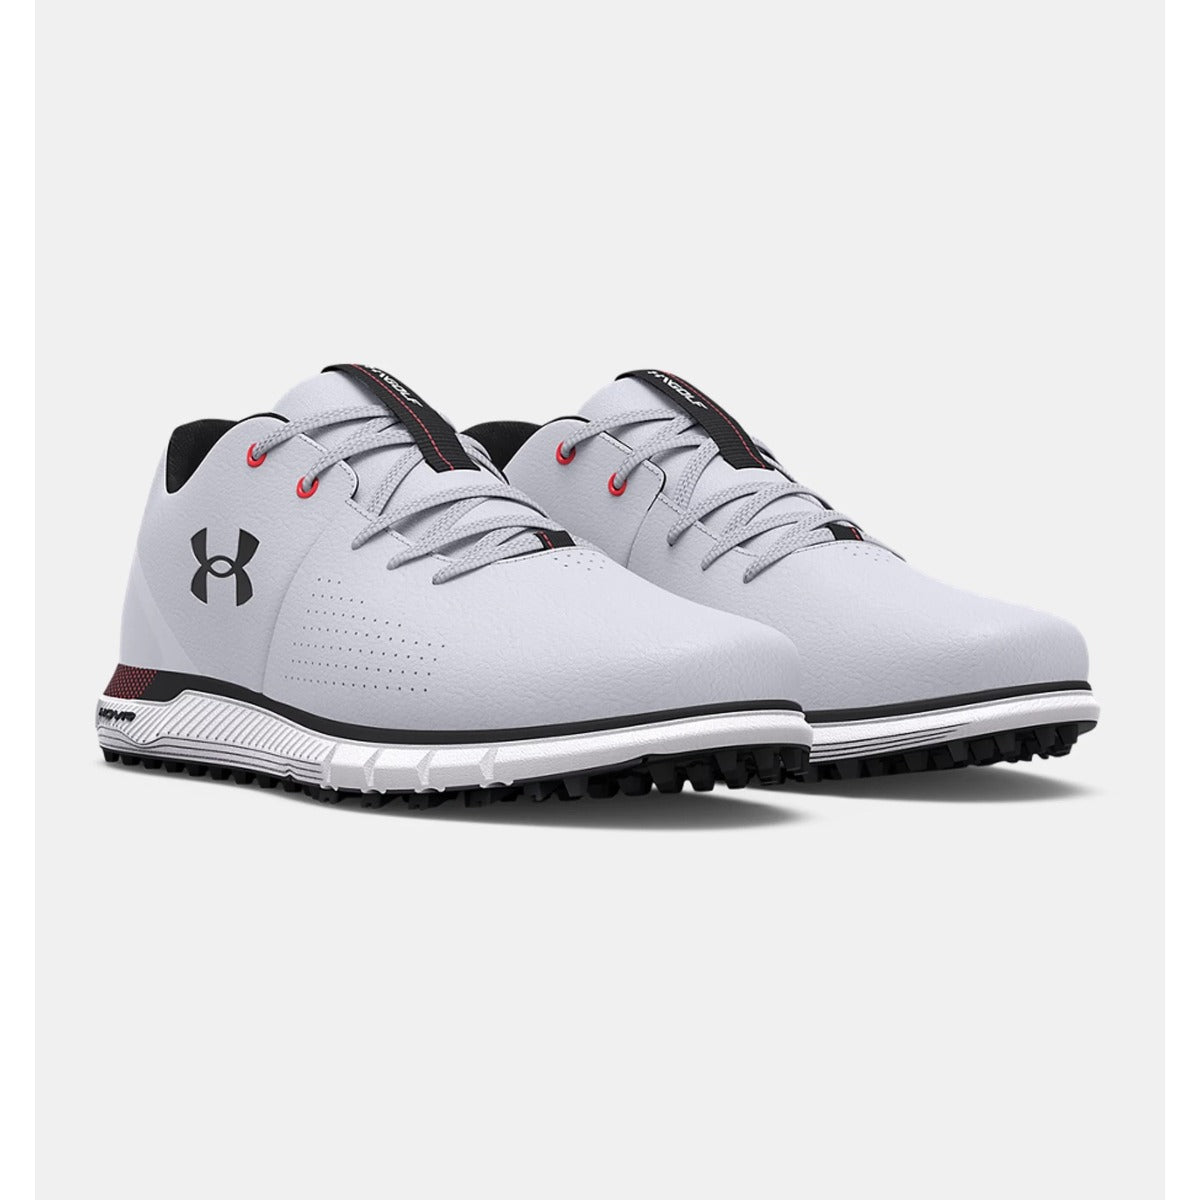 Under Armour HOVR Fade 2 Spikeless Wide Golf Shoes Mens (Grey 102)